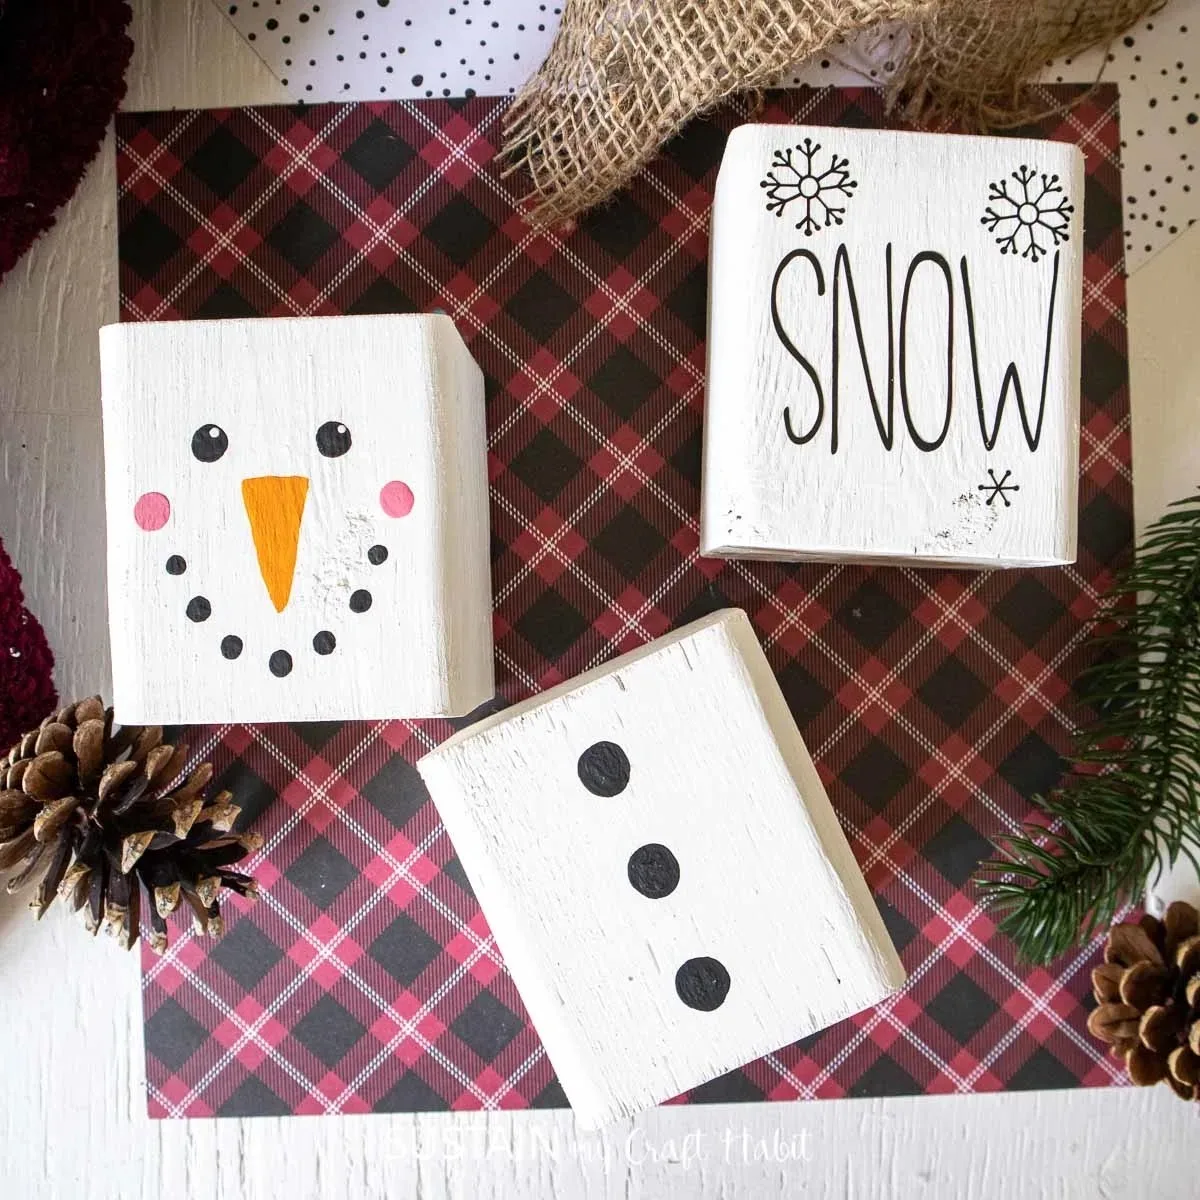 20 DIY Wood Block Crafts To Make For Christmas – Home and Garden